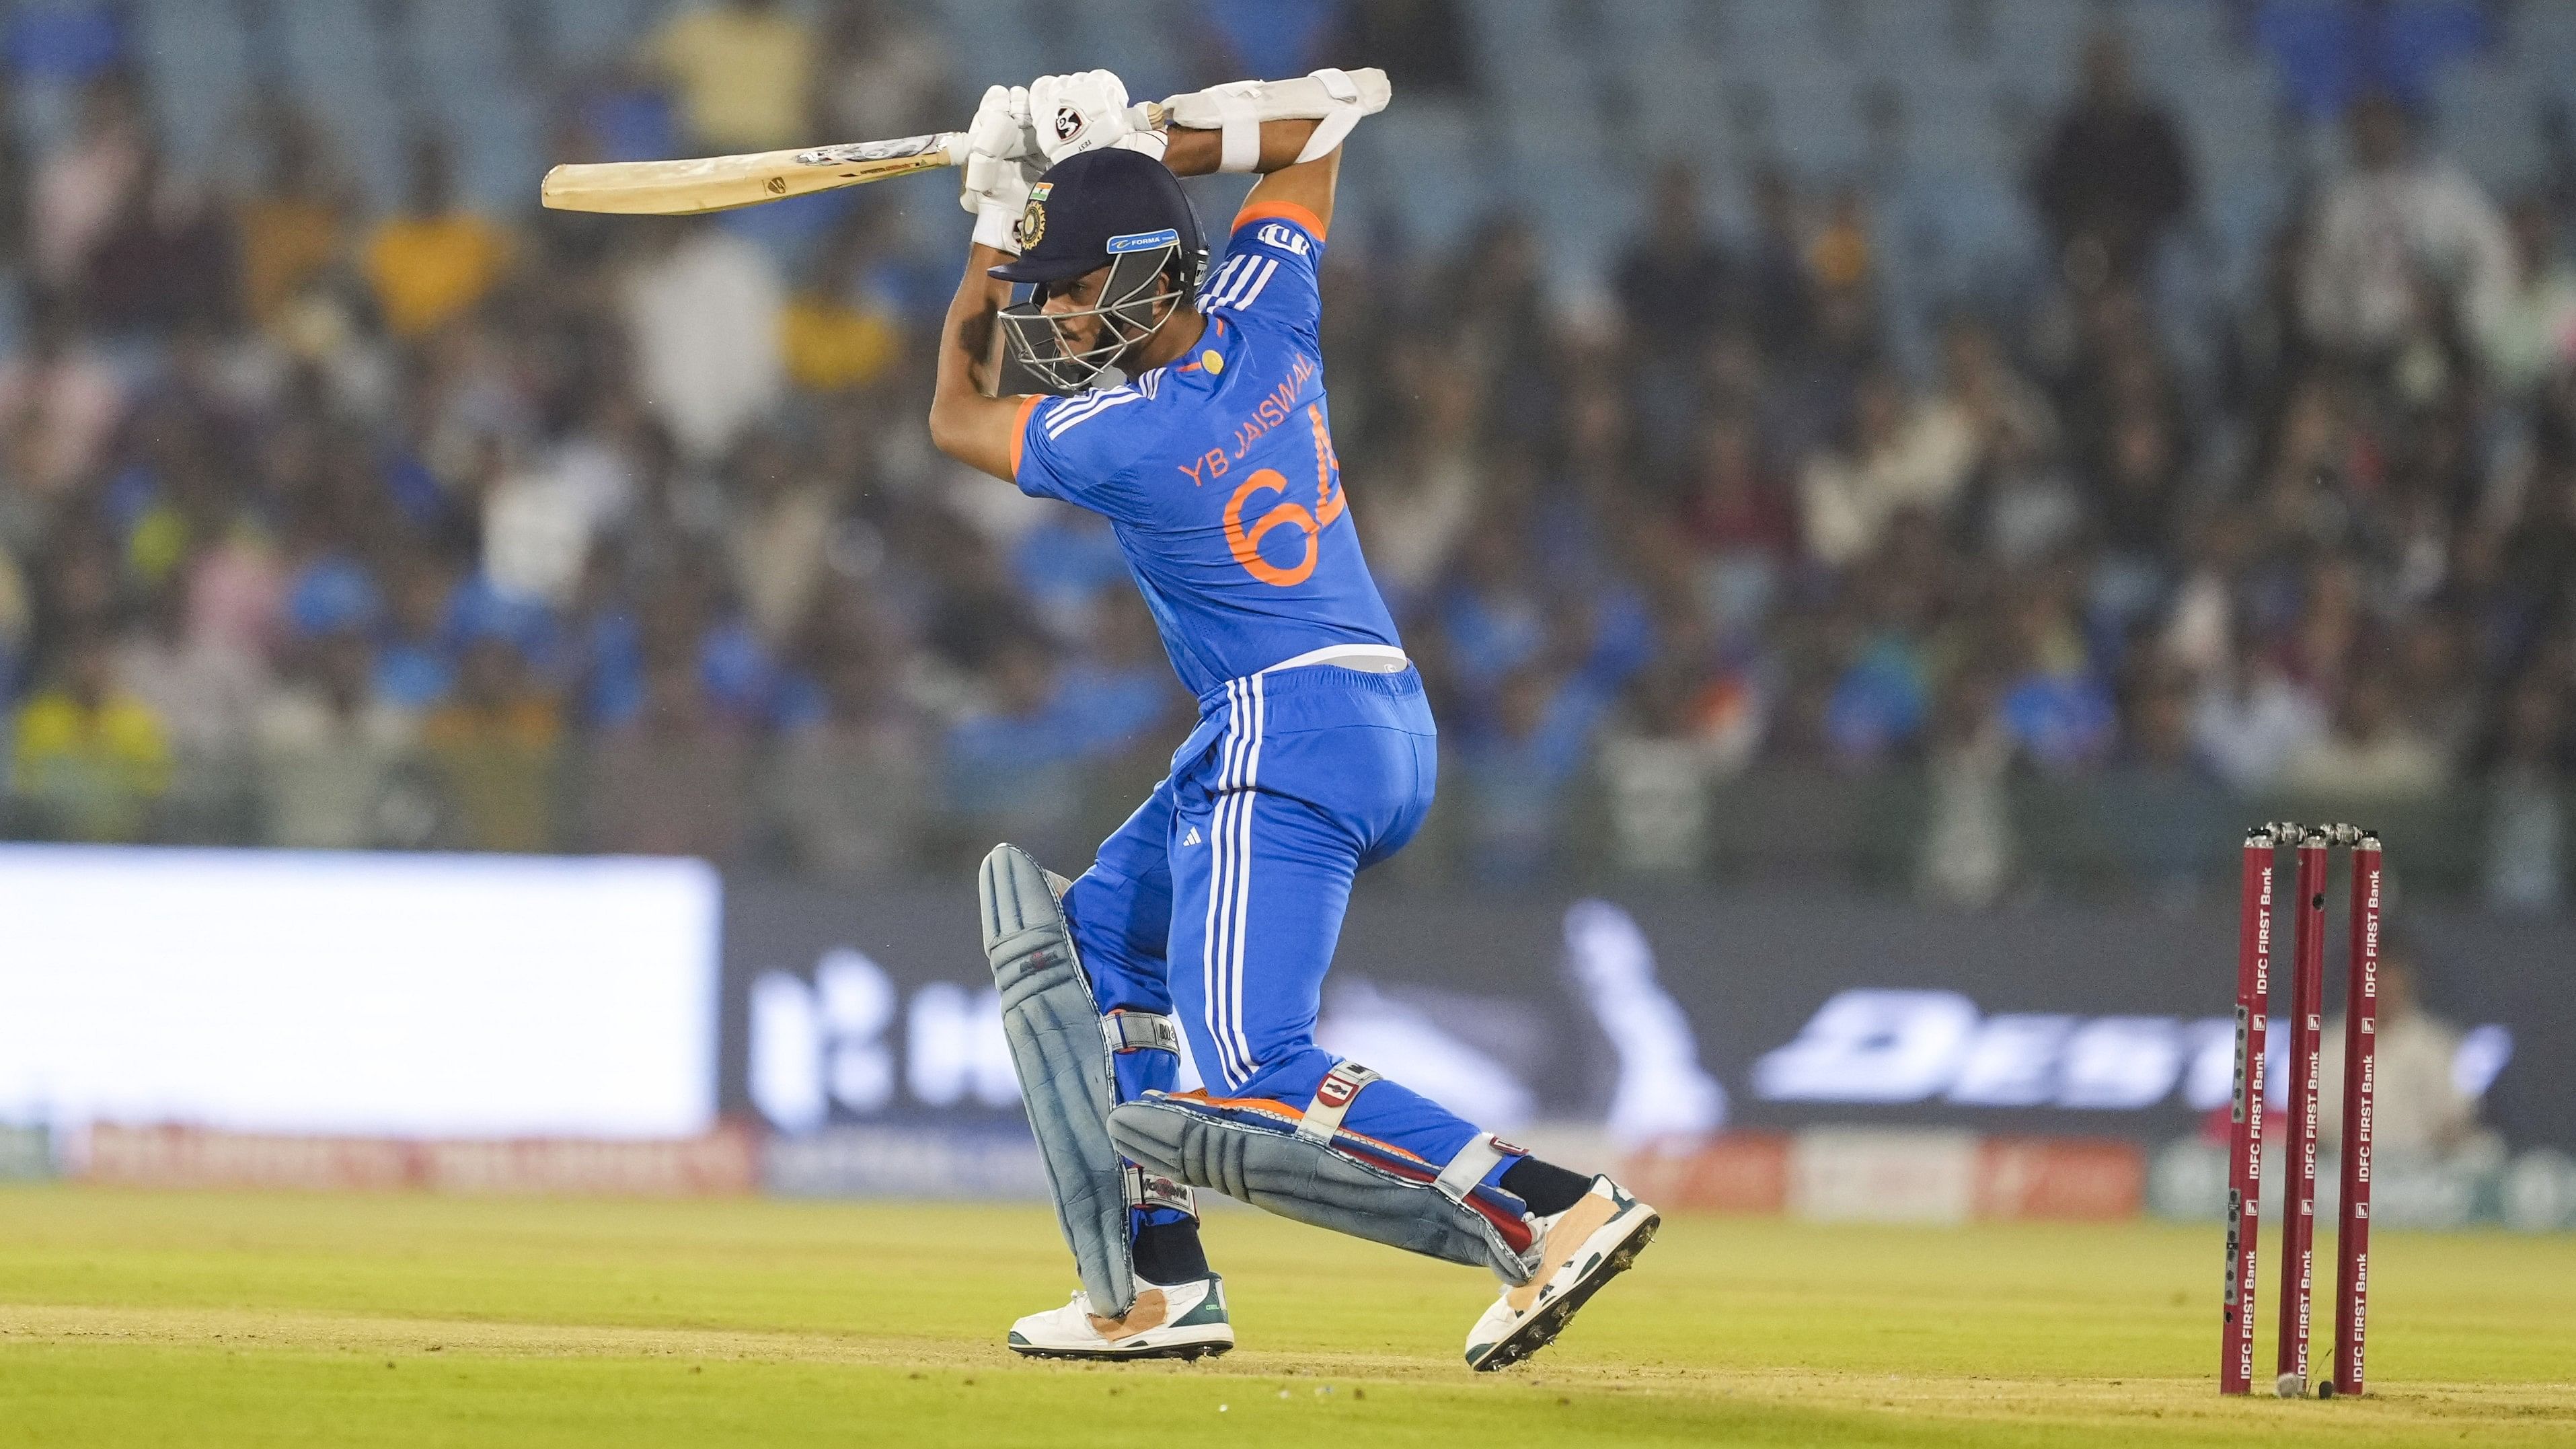 <div class="paragraphs"><p>Indian opener Yashasvi Jaiswal will be eyeing a big knock in the final T20I against Australia in Bengaluru on Sunday. </p></div>